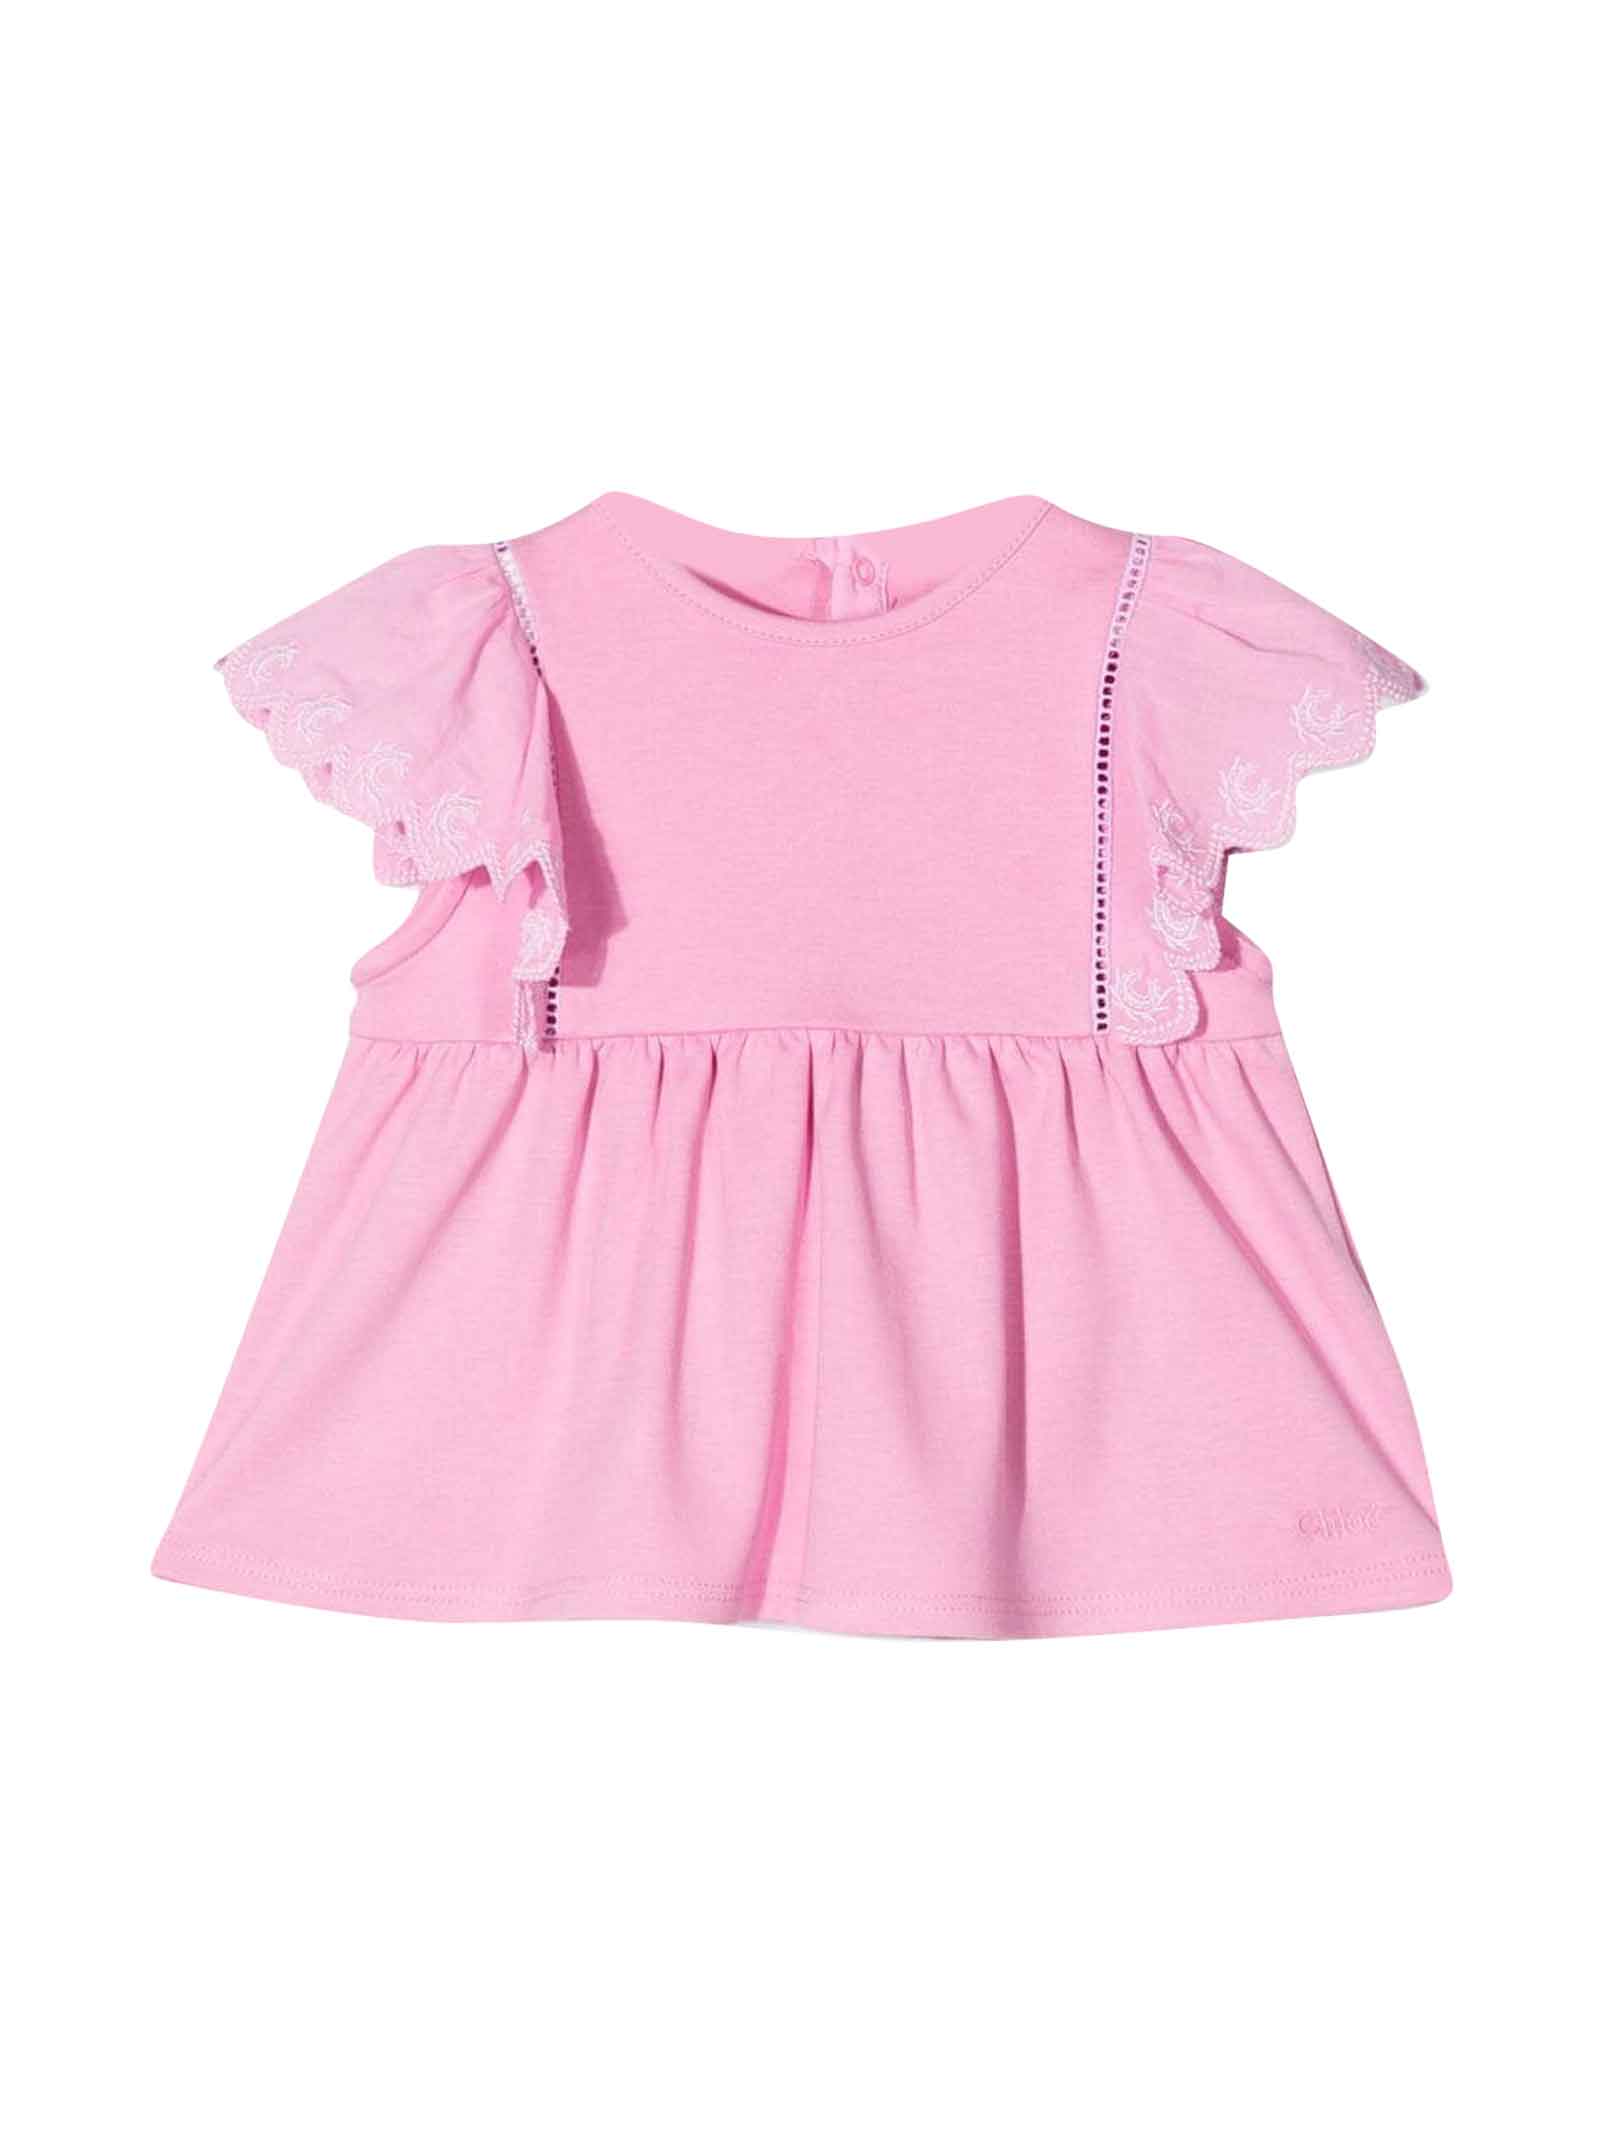 CHLOÉ BABY GIRL CLOUSE CREWNECK CHLOÈ KIDS.ROUND NECK, BACK BUTTON CLOSURE, SHORT SLEEVES, RUCHED DETAIL A